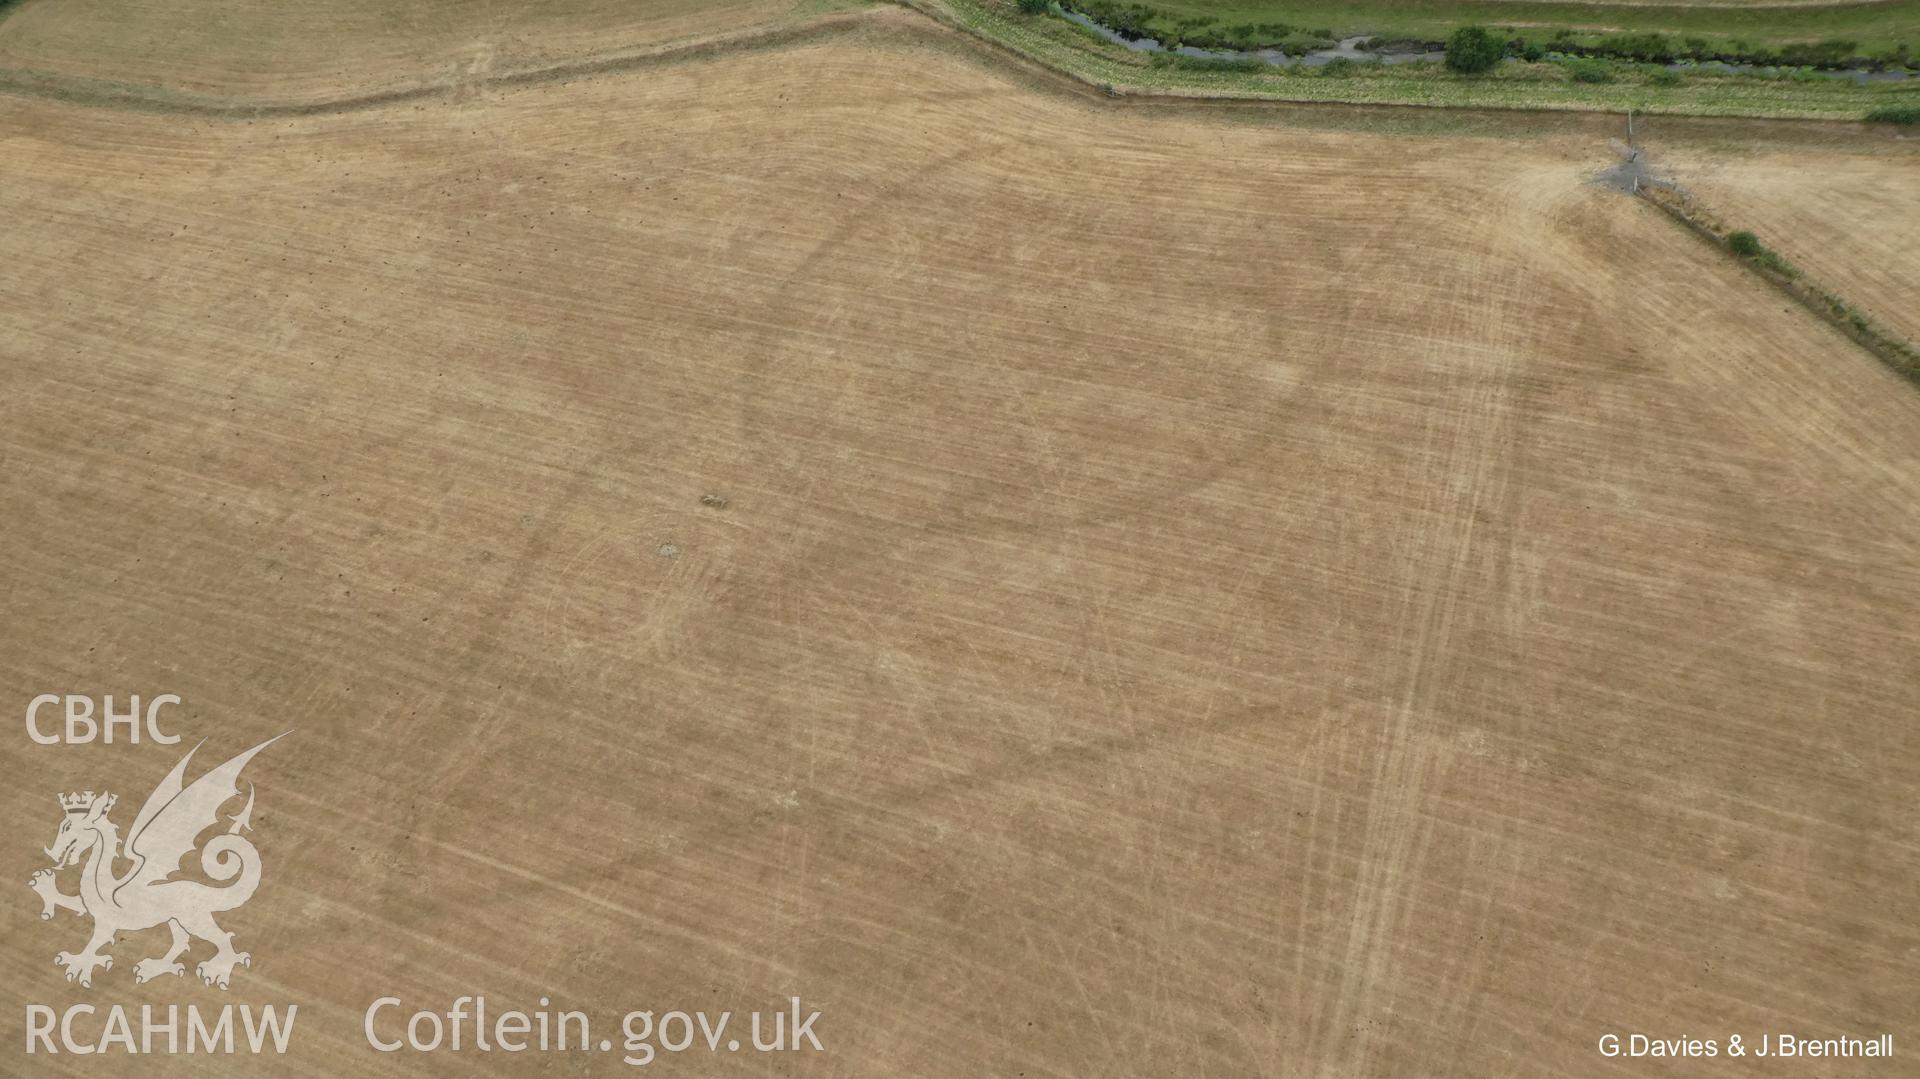 Aerial photograph of the Bryn-Crug cropmark complex, taken by Glyn Davies & Jonathan Brentnall under drought conditions, 15/07/2018. This photograph is the original, see BDC_01_01_01 for a modified version which enhances the visibility of the archaeology.